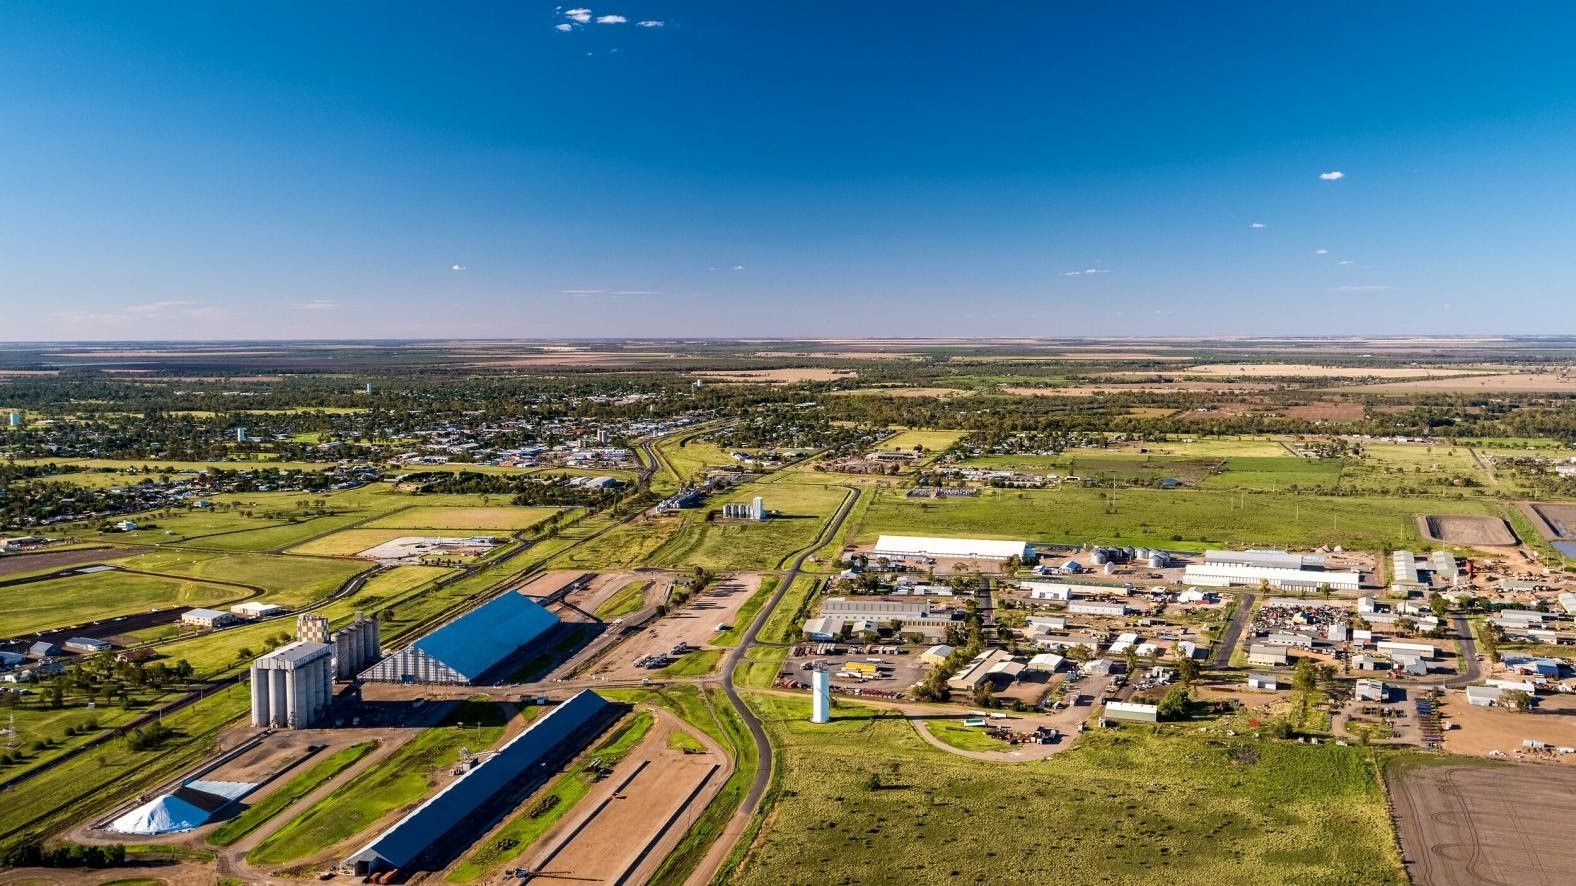 An aerial view of a sunny day across houses and businesses of Moree